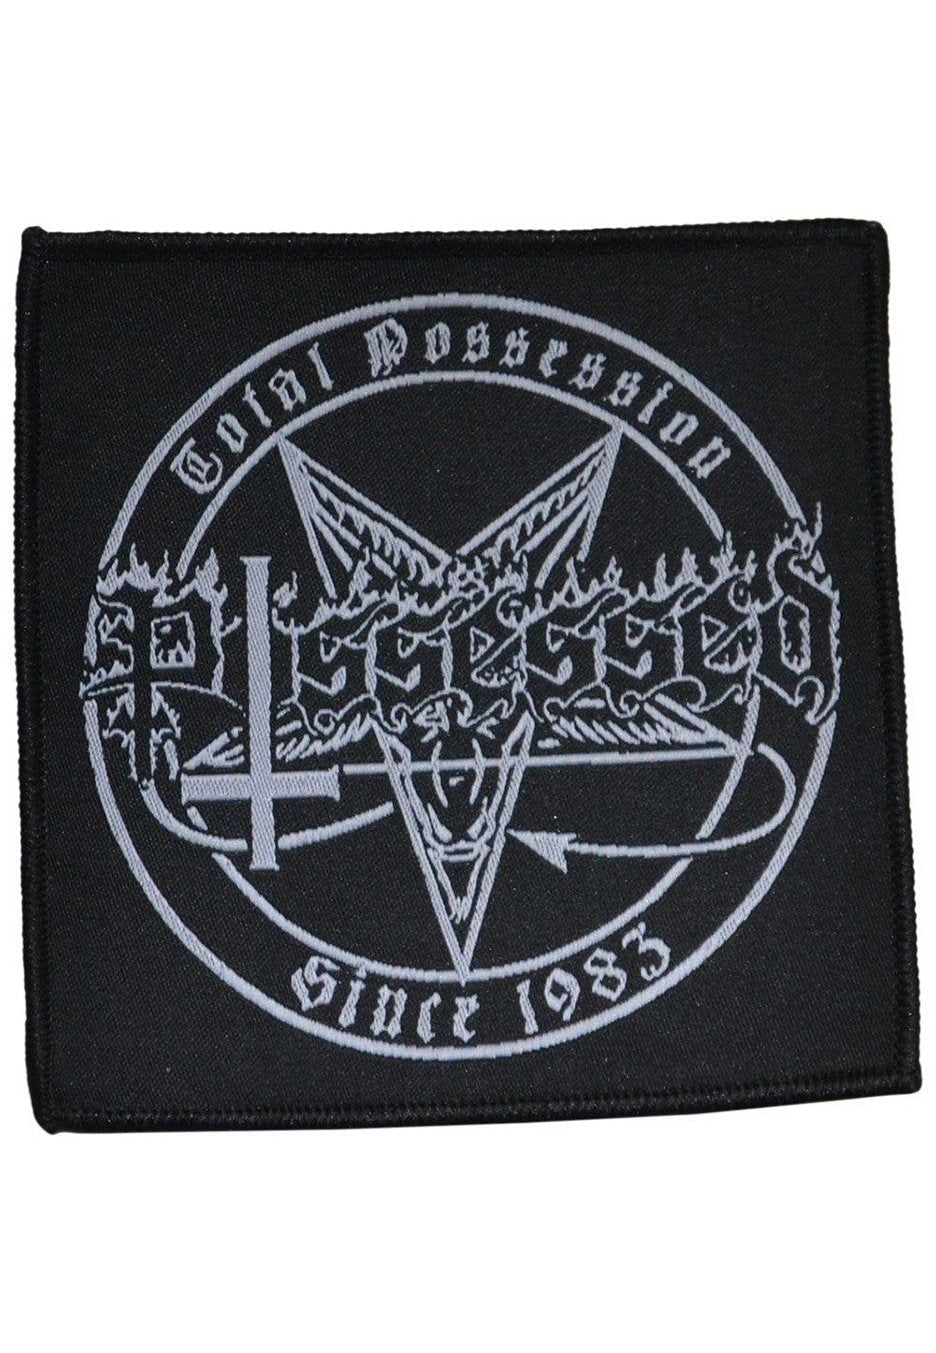 Possessed - Total Possession - Patch